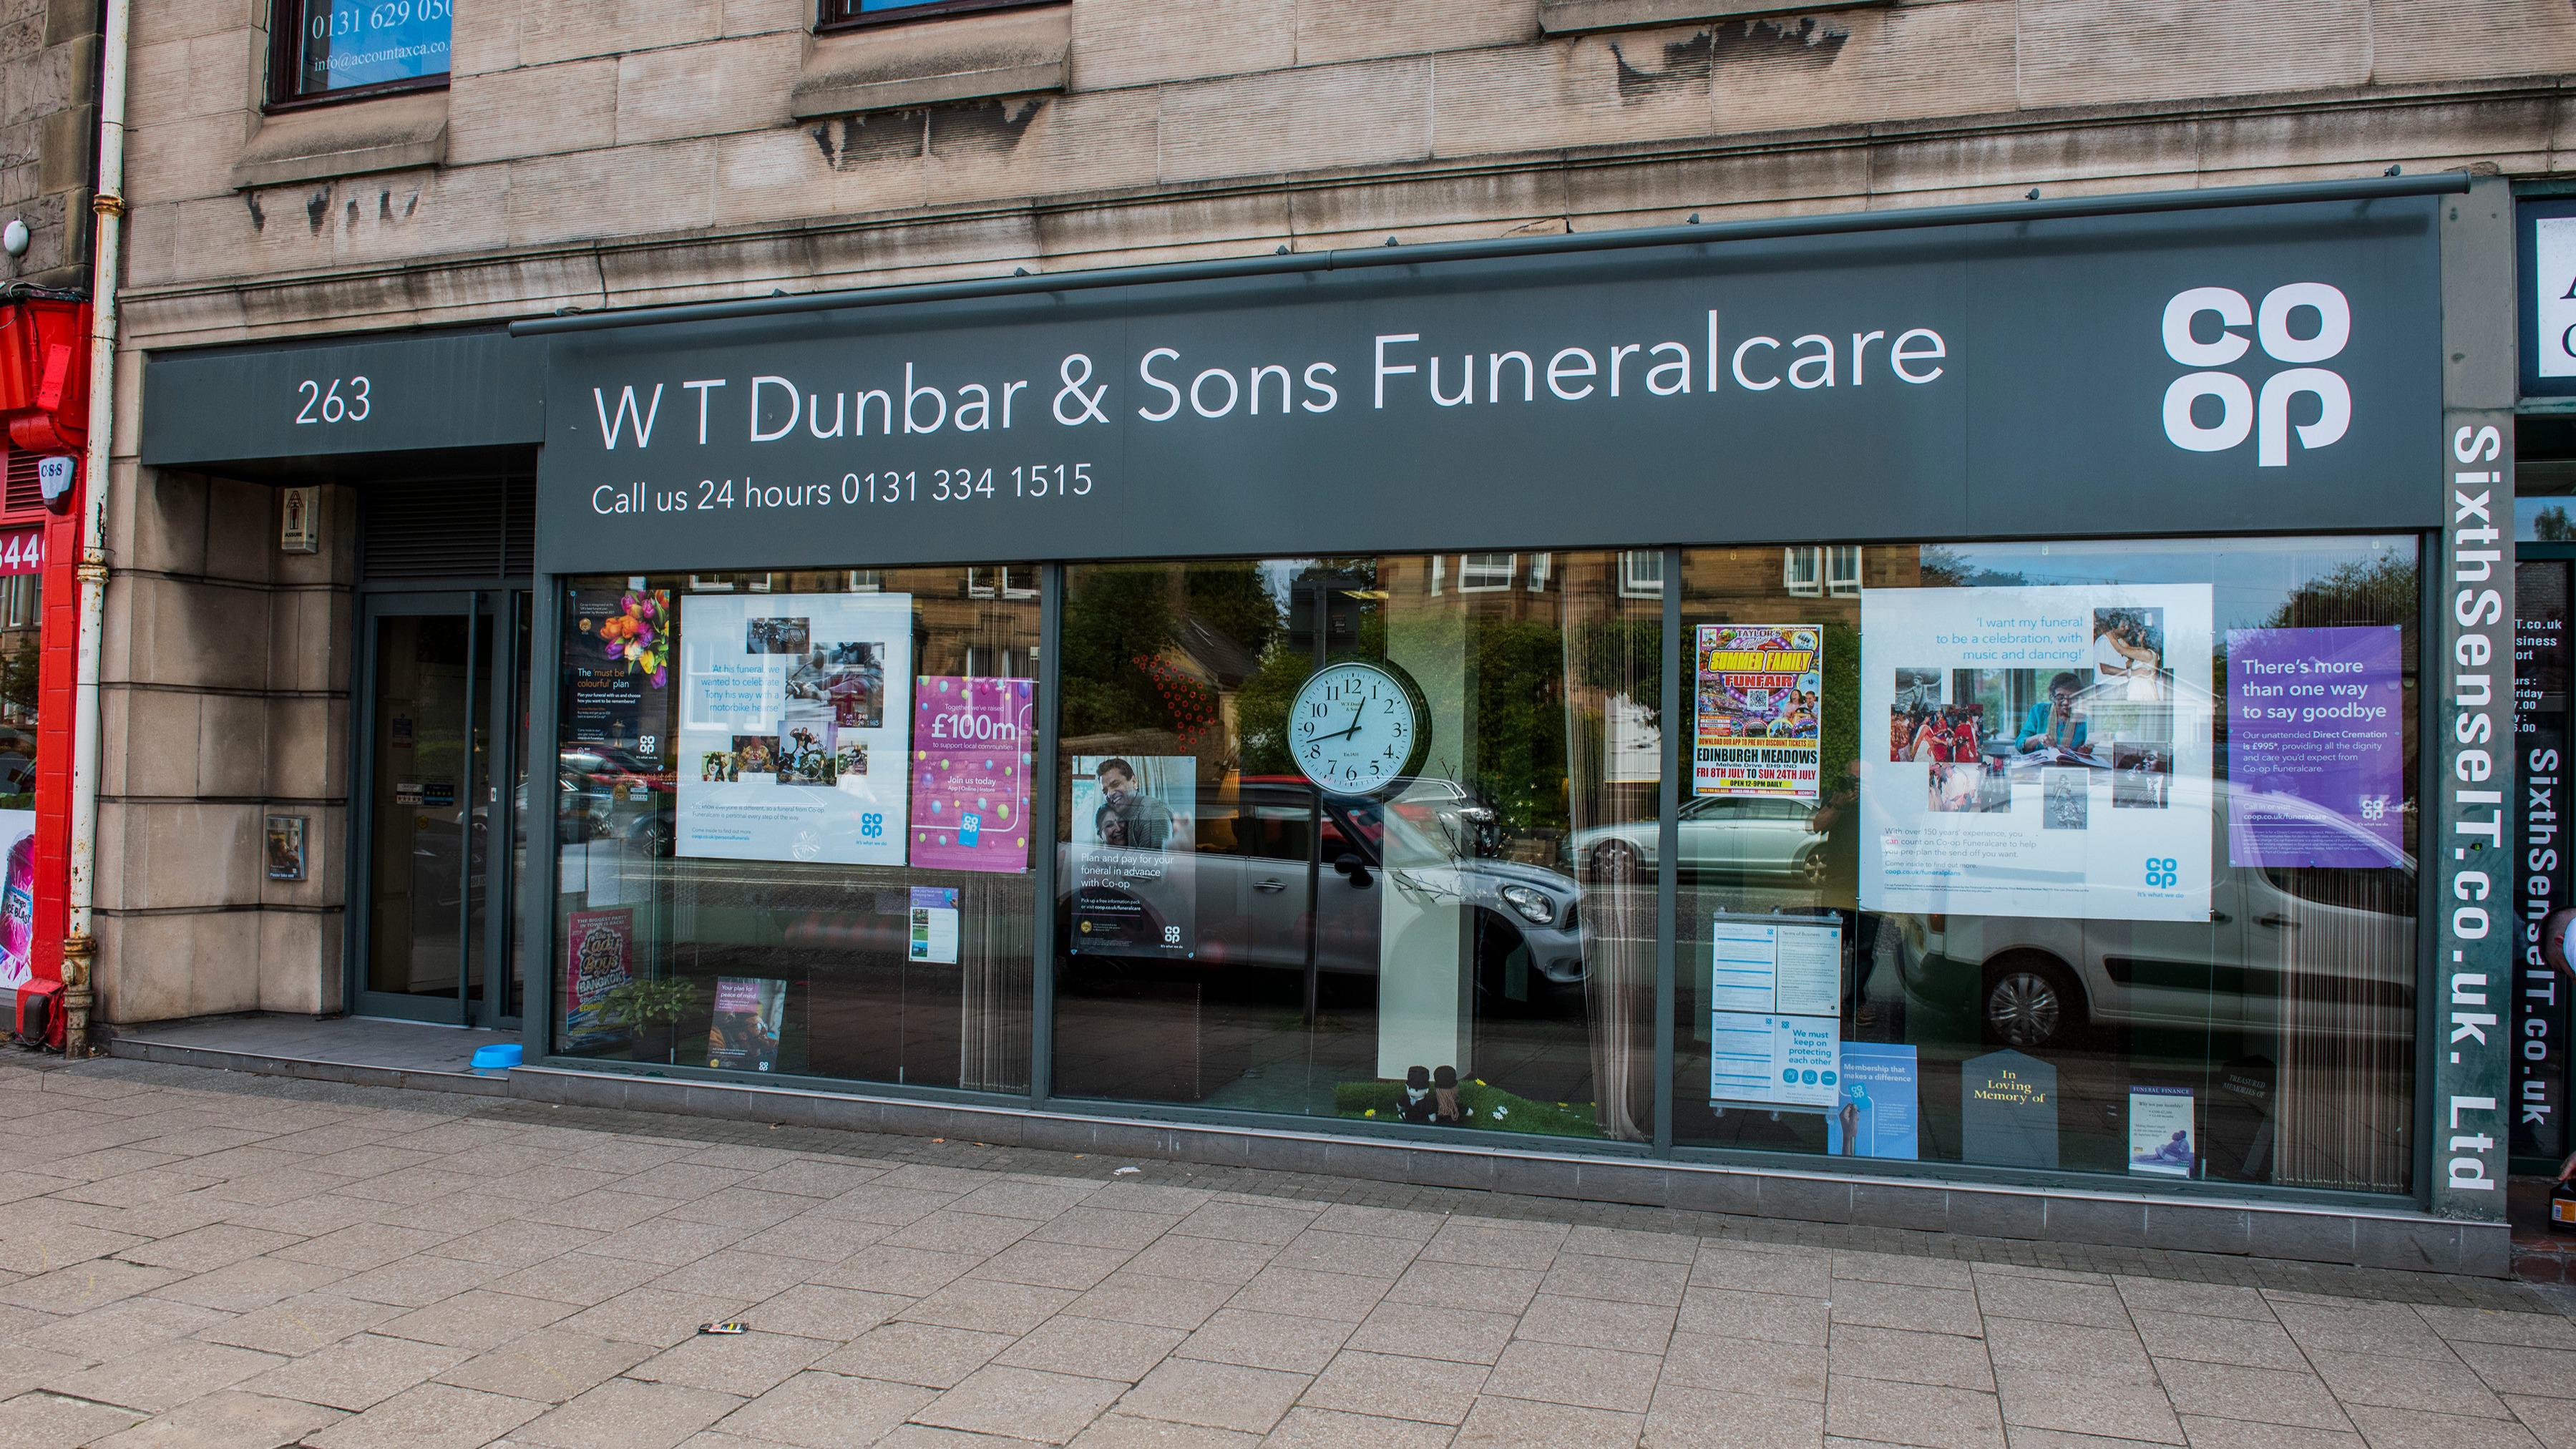 Images W T Dunbar & Sons Funeralcare